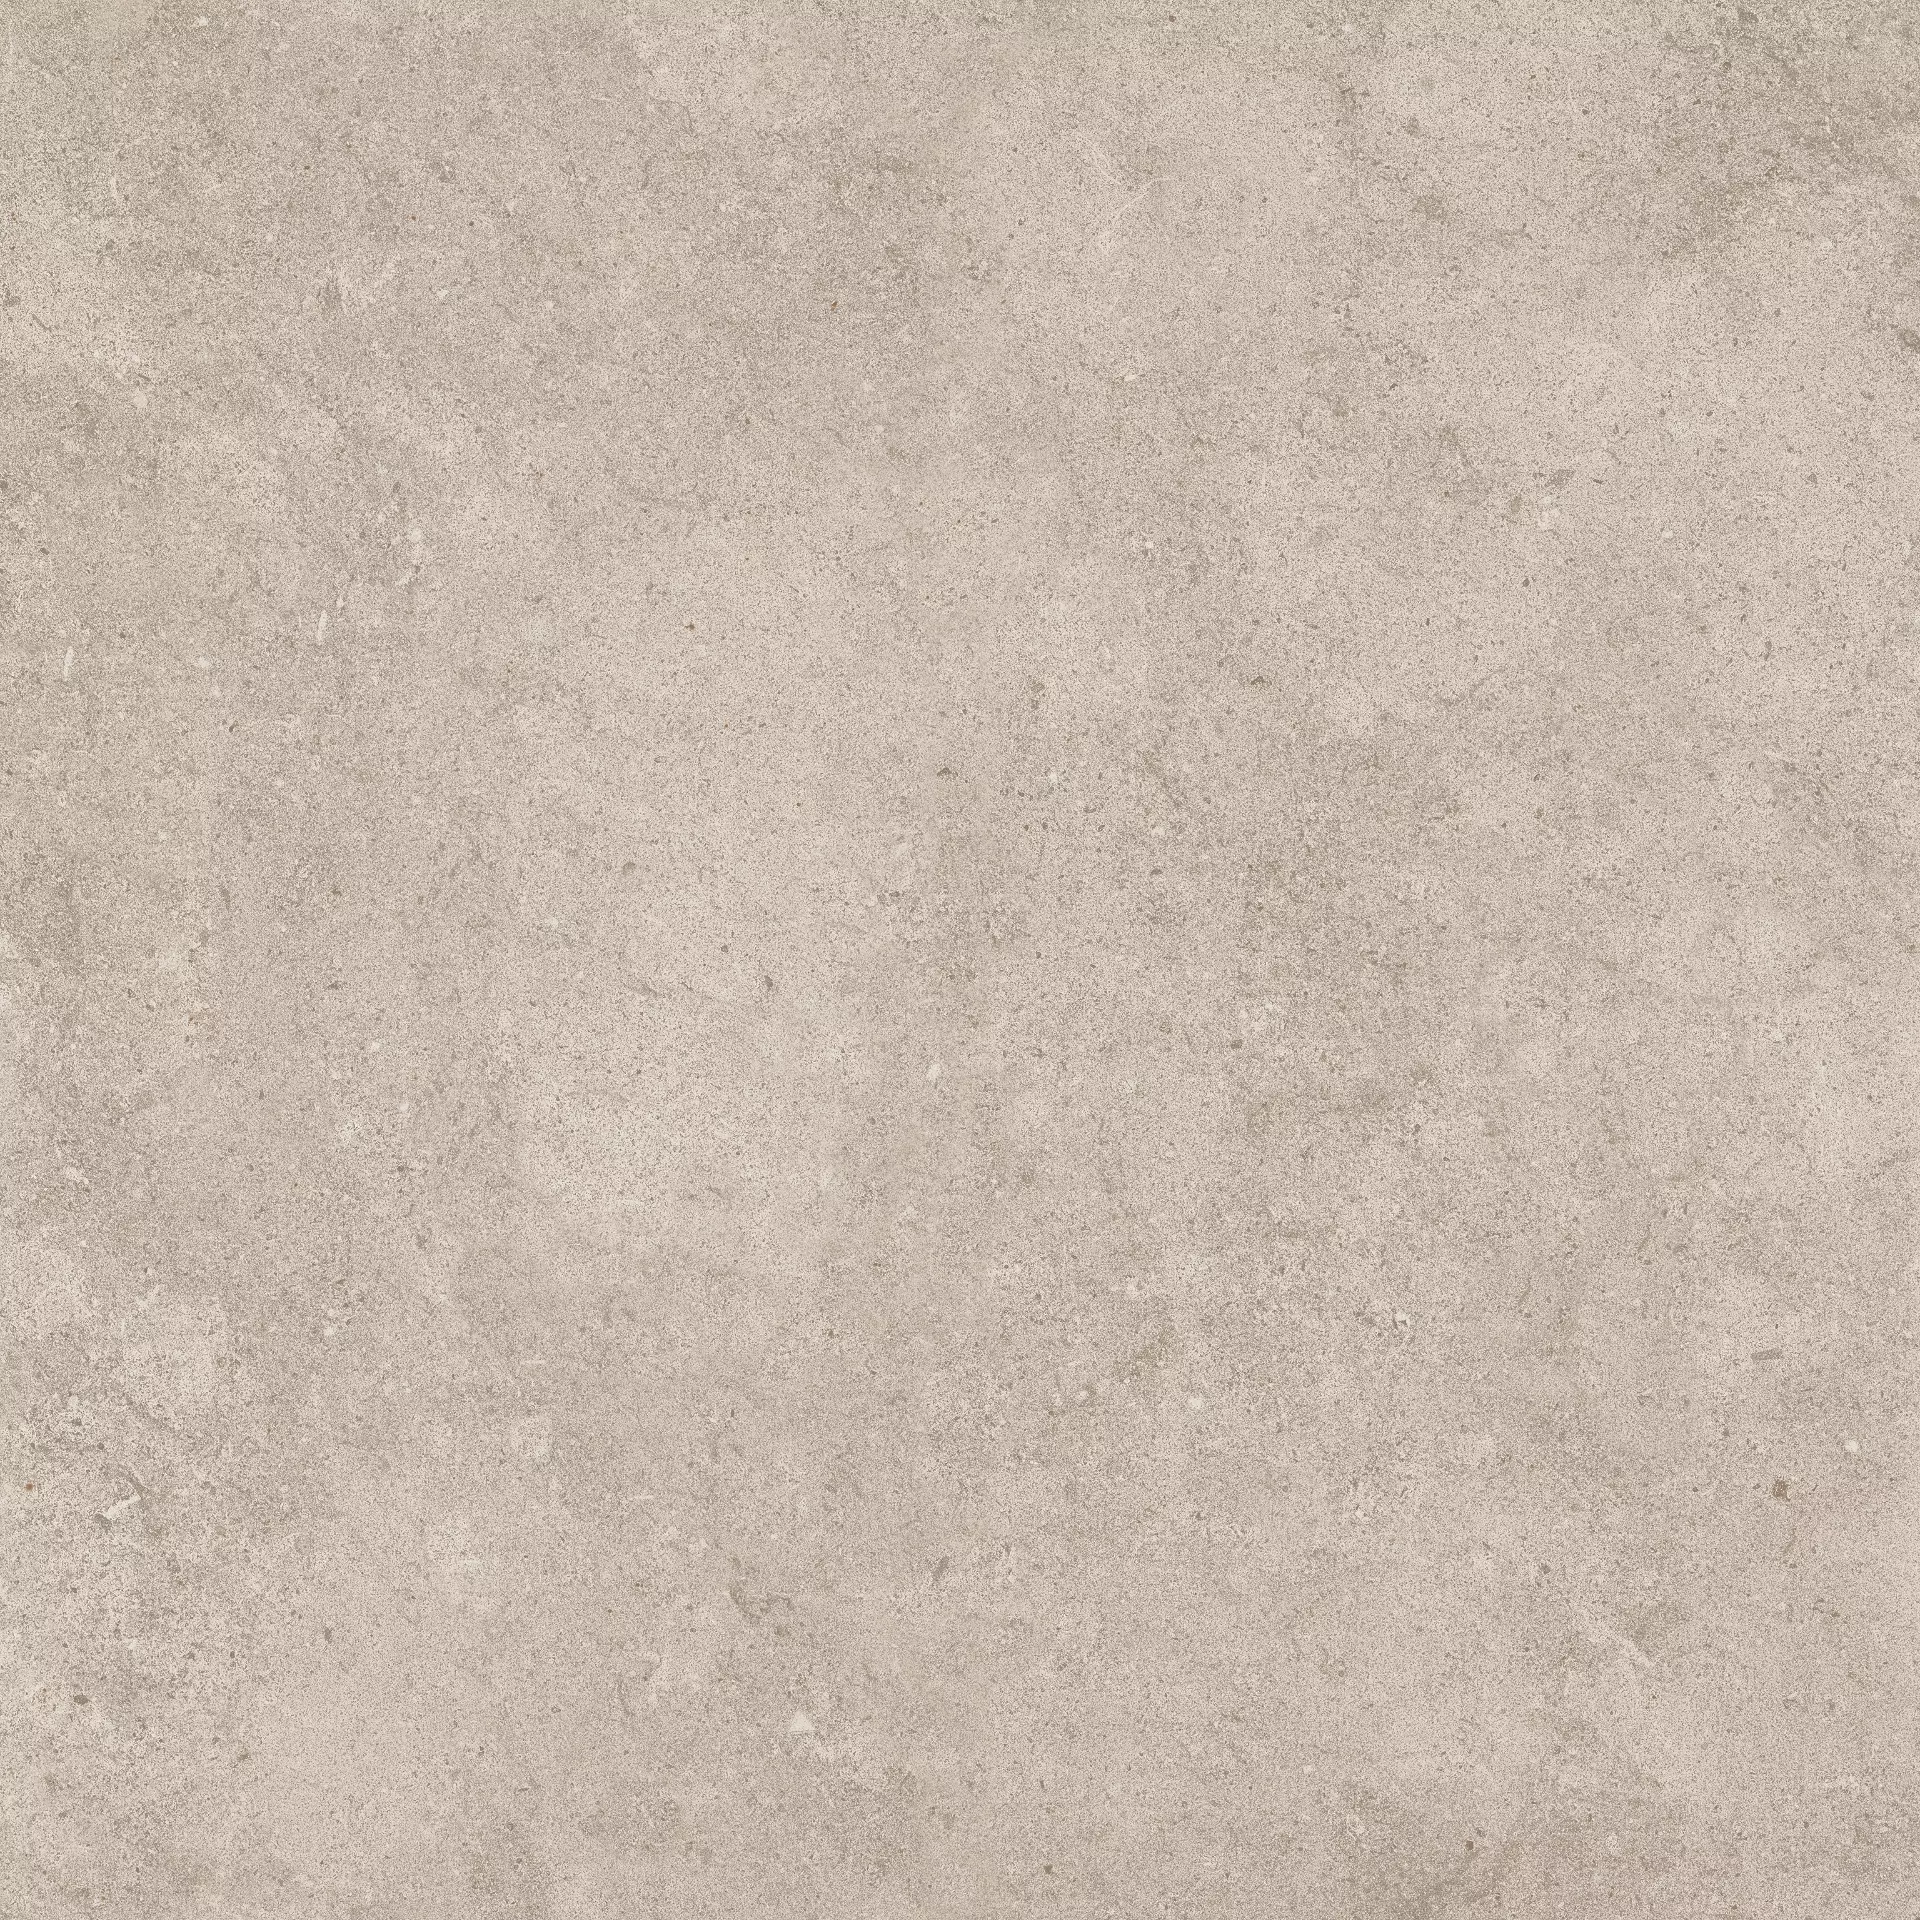 Sant Agostino Highstone Greige Natural CSAH12GR12 120x120cm rectified 10mm